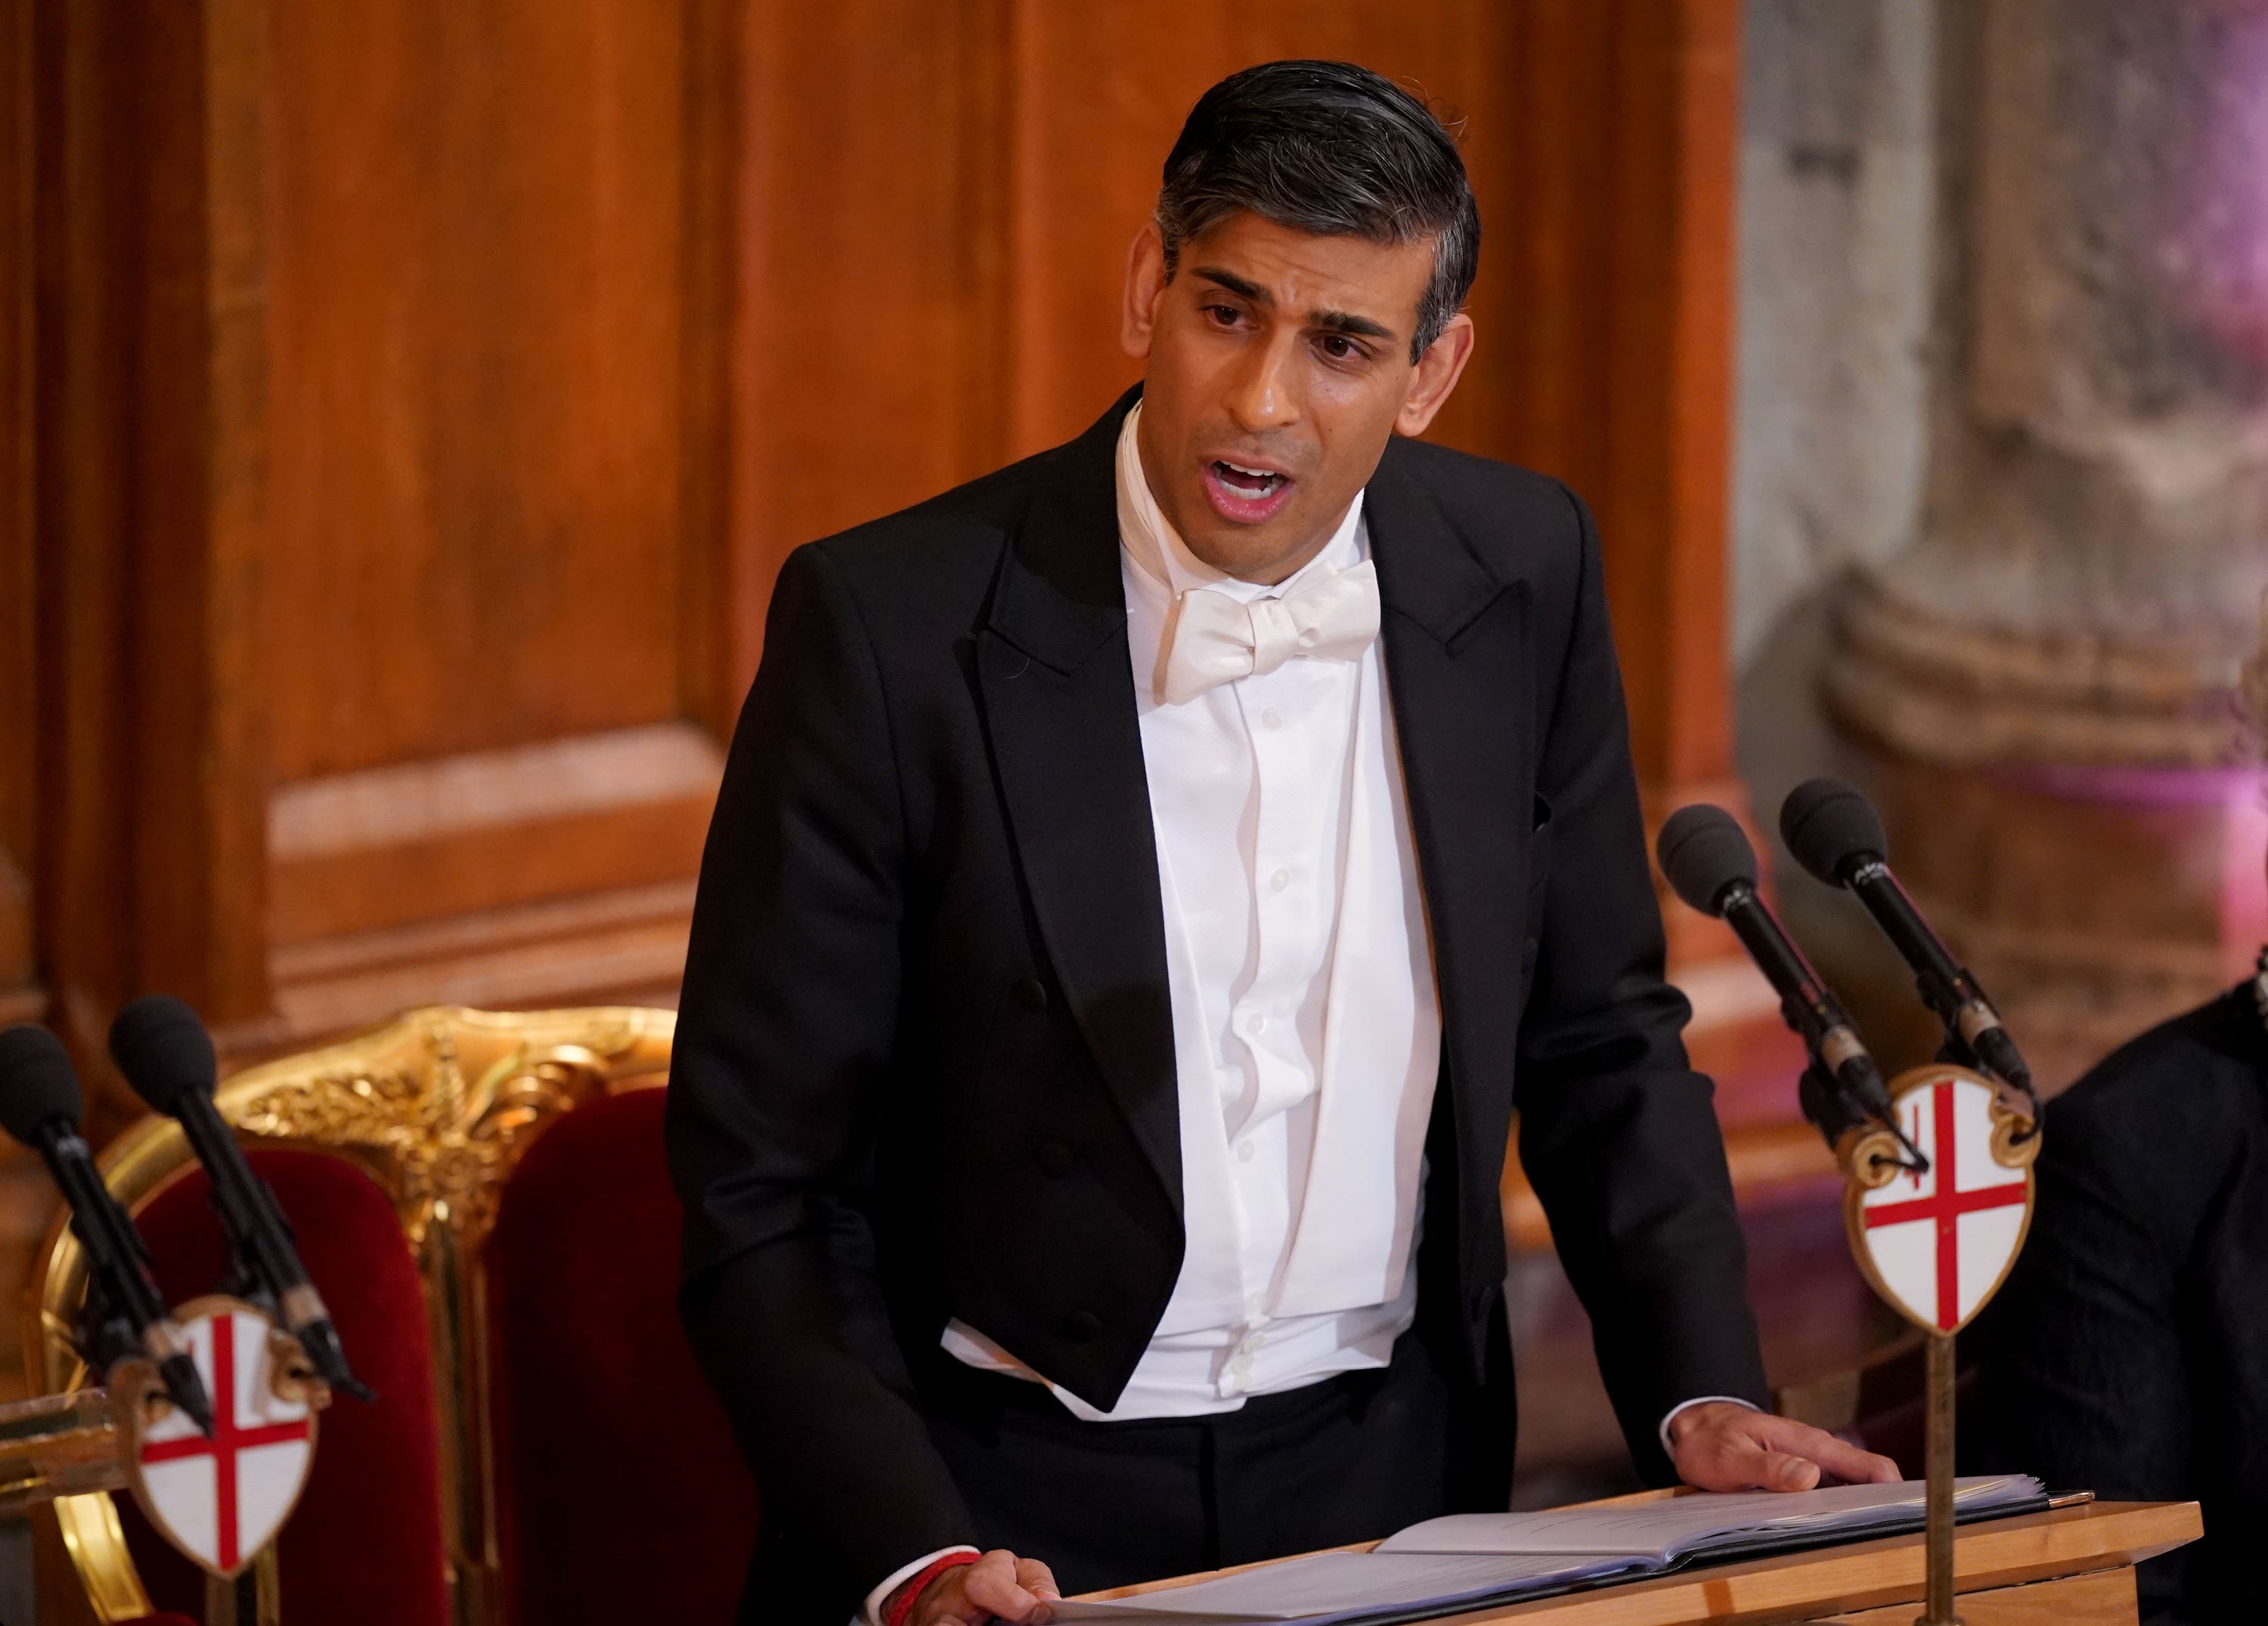 Prime Minister Rishi Sunak speaks during the annual Lord Mayor’s Banquet at the Guildhall.